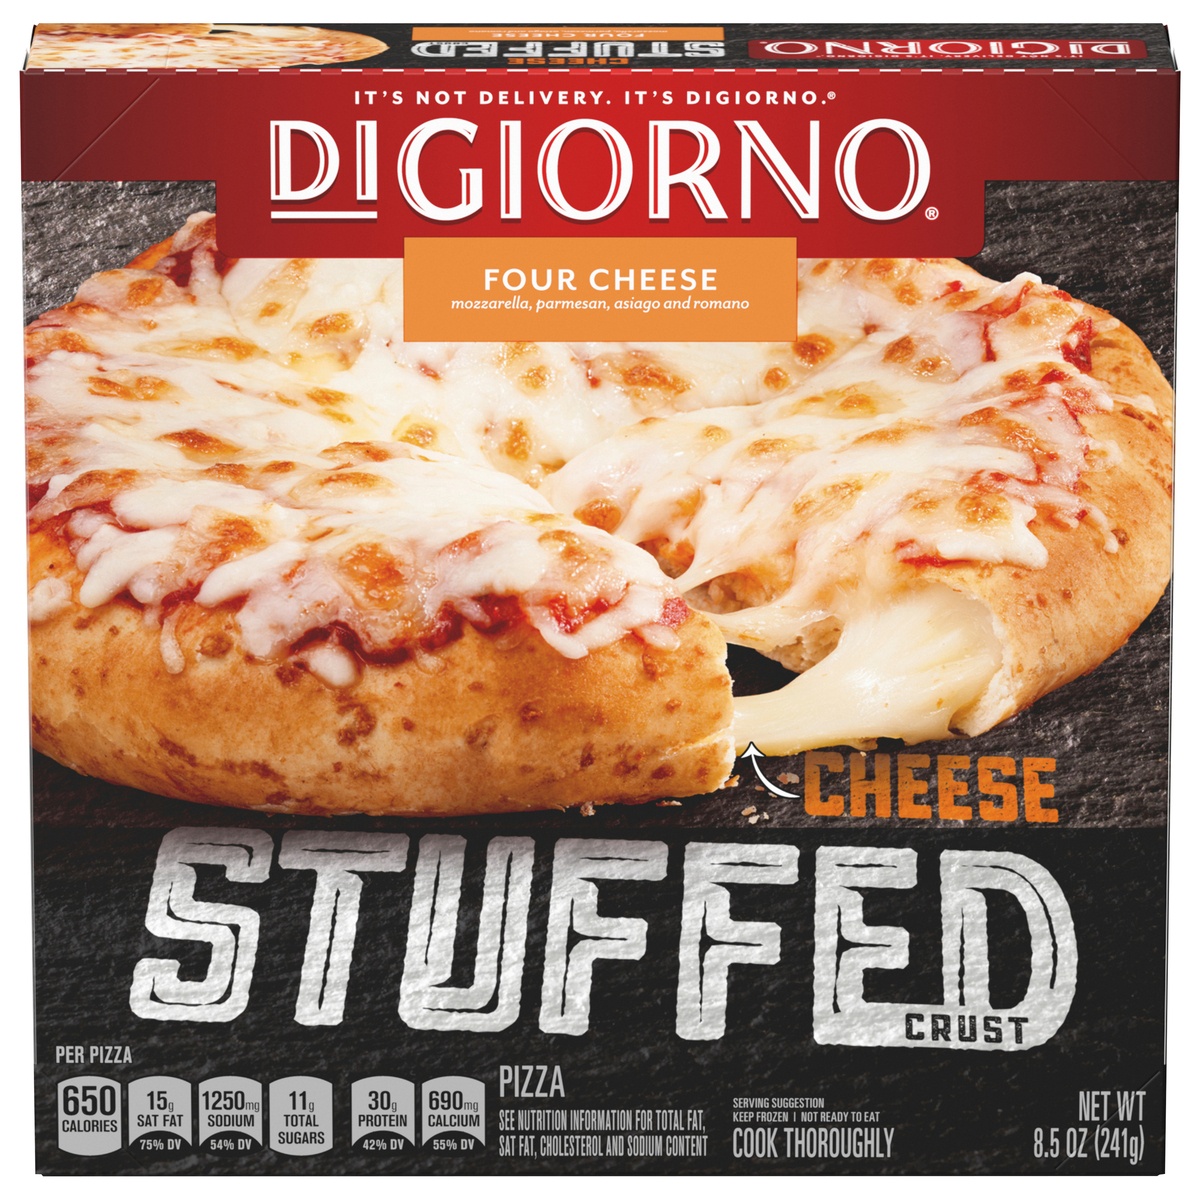 slide 11 of 11, DIGIORNO Frozen Four Cheese Personal Pizza on a Stuffed Crust, 8.5 oz